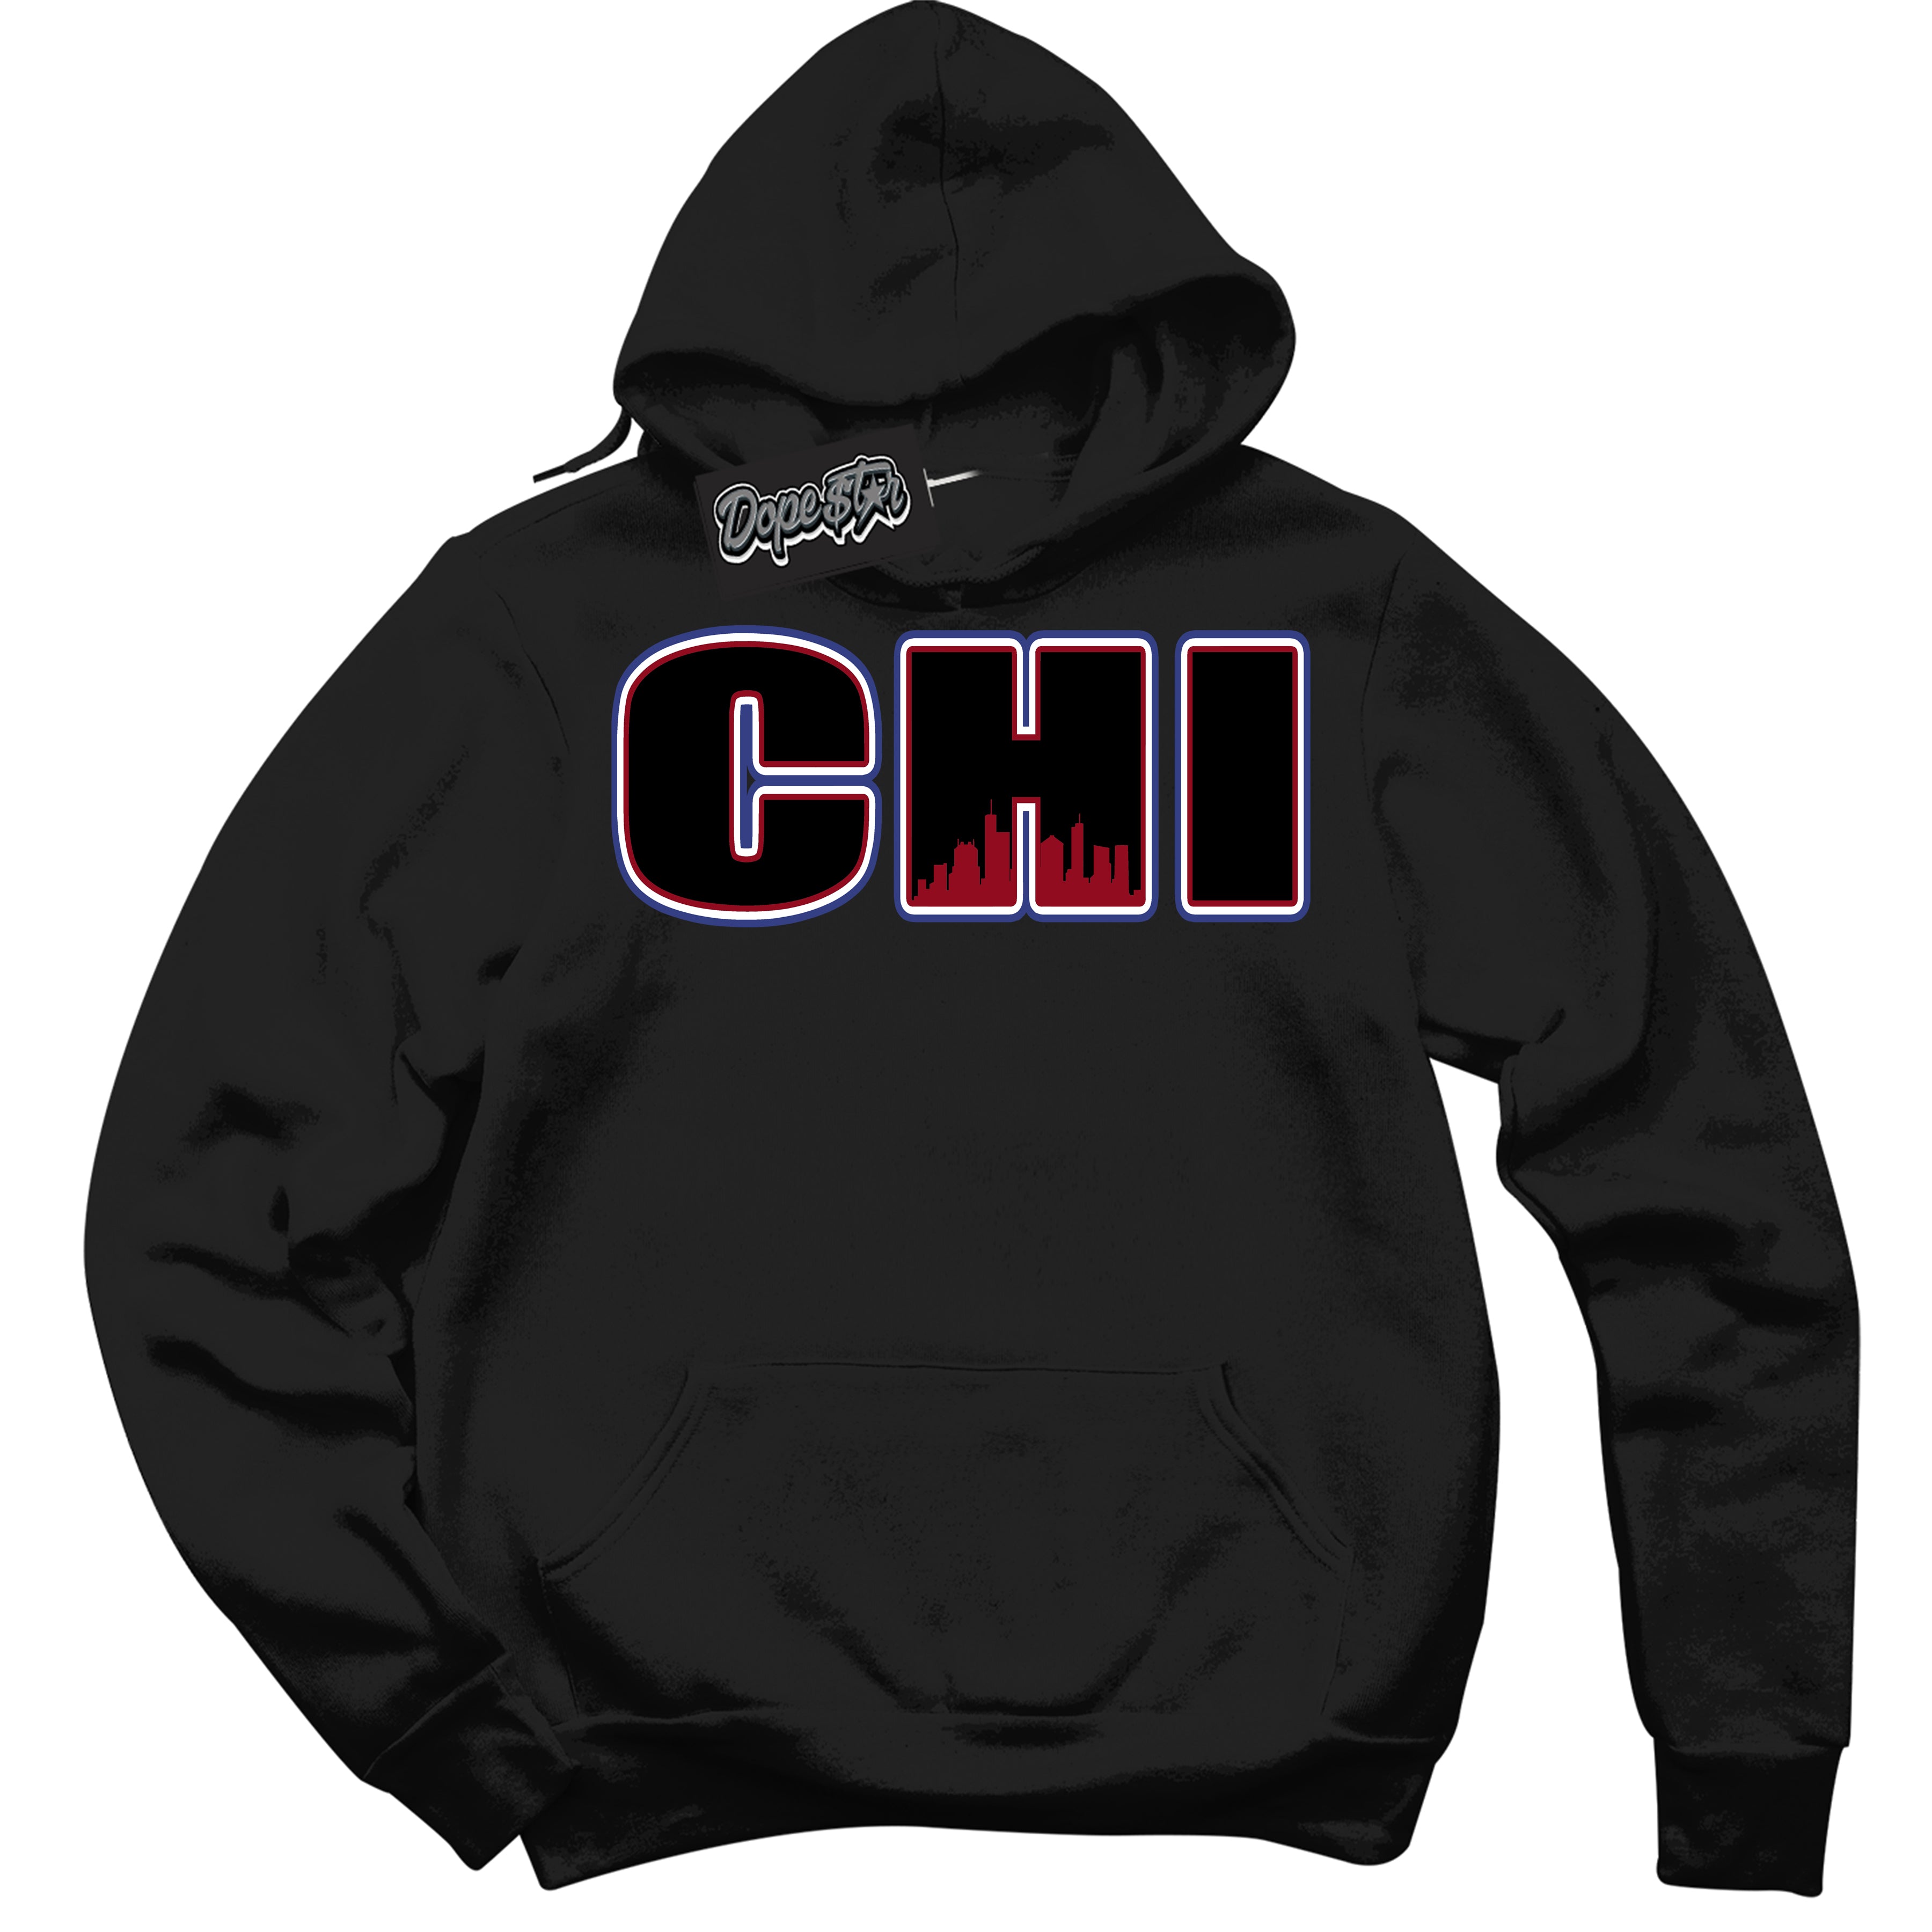 Cool Black Hoodie with “ Chicago ”  design that Perfectly Matches Playoffs 8s Sneakers.